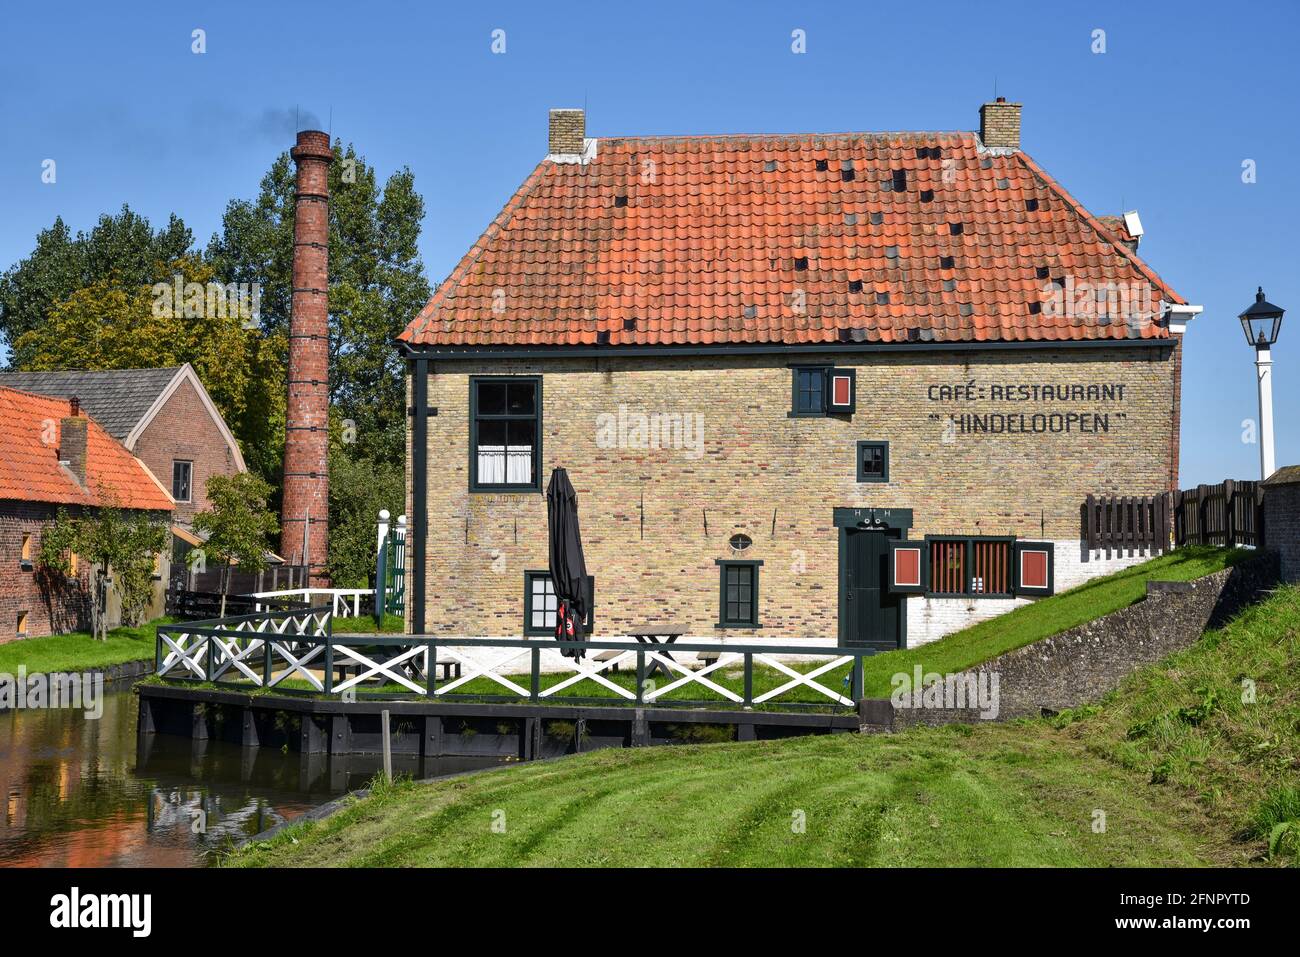 Enkhuizen, the Netherlands - September 2020. The Zuiderzeemuseum; an open air museum at the shore of the IJsselmeer with traditional Dutch fishermen cottages and flat bottomed fishing boats. High quality photo. Stock Photo